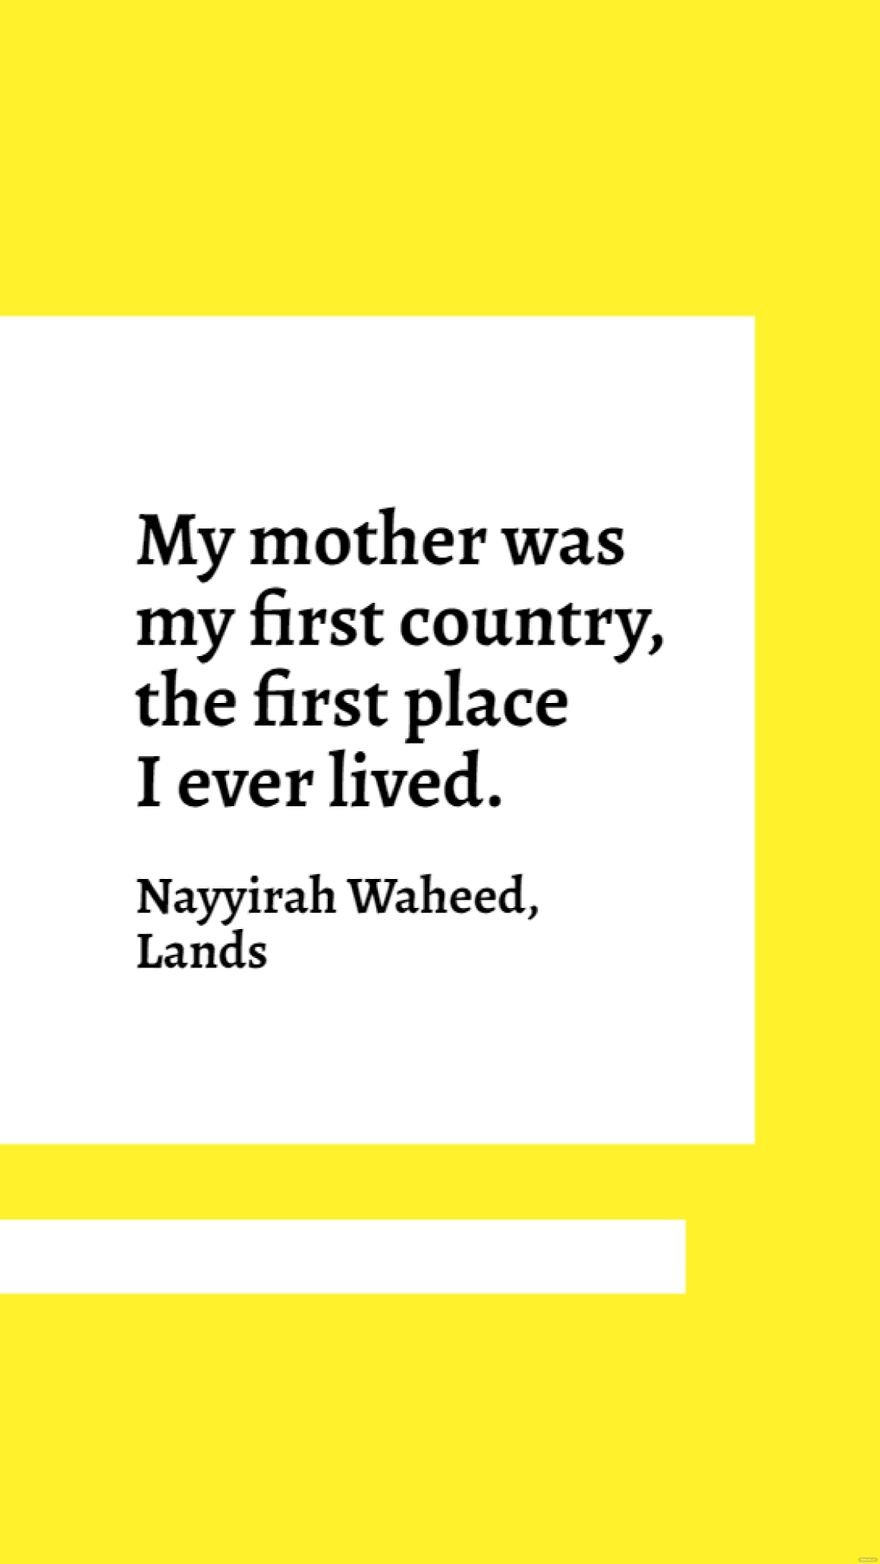 Free Nayyirah Waheed, Lands - My mother was my first country, the first place I ever lived.